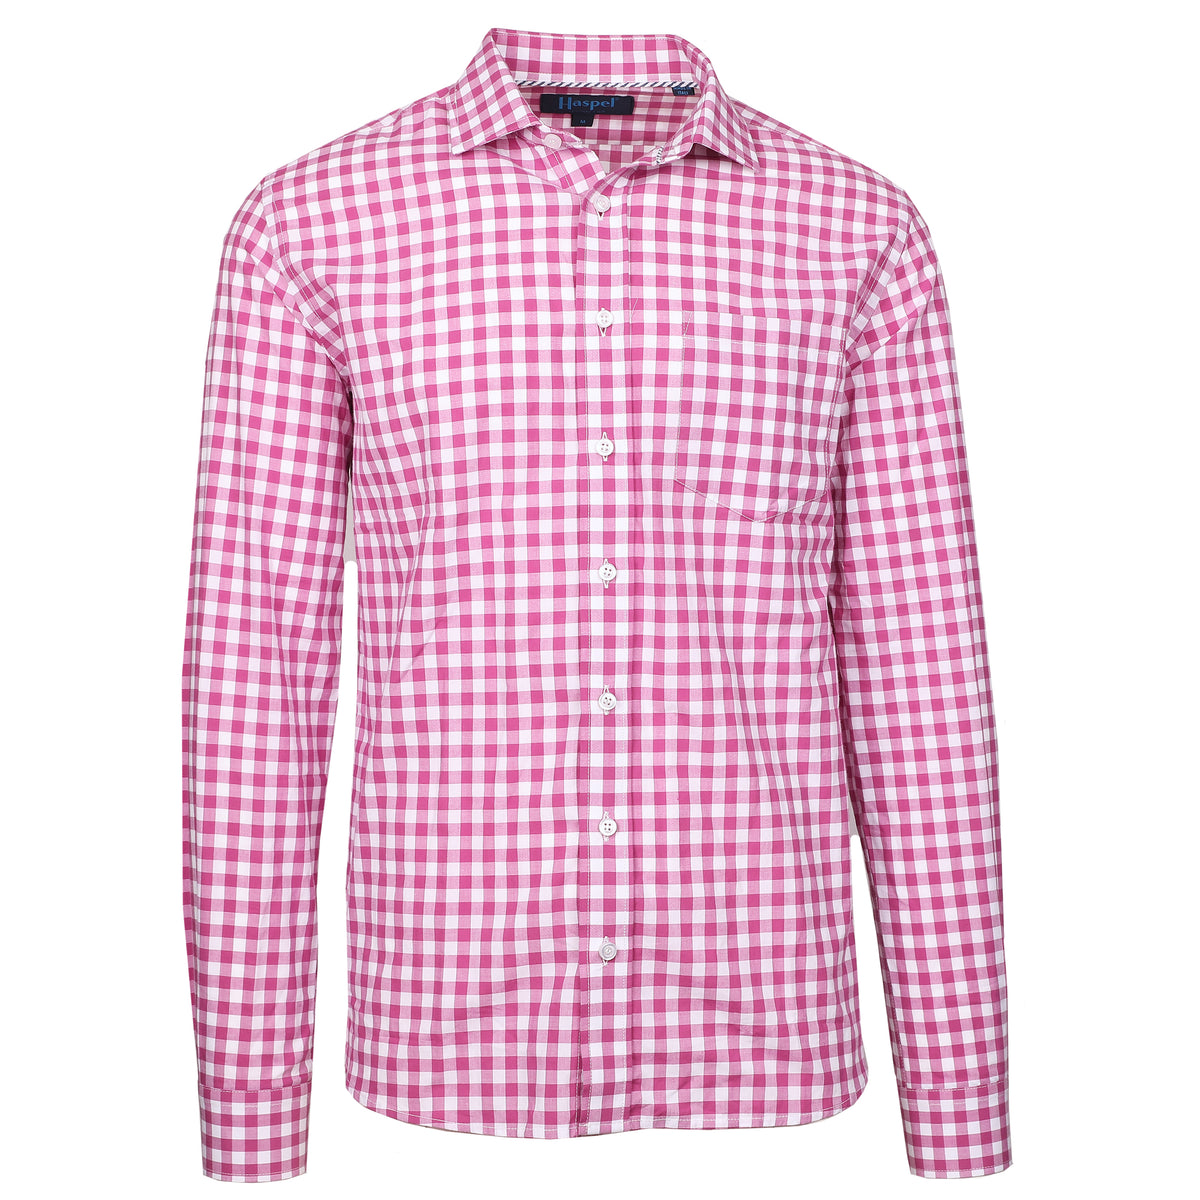 Spice up your style with the Audubon Plum Large Gingham! This pink gingham piece adds a playful touch to any outfit. Stand out in a sea of plain colors and exude that &amp;nbsp;classic charm.&lt;/p&gt; &lt;p&gt;100% Cotton • Spread Collar • Long Sleeve • Chest Pocket • Machine Washable • Made in Italy